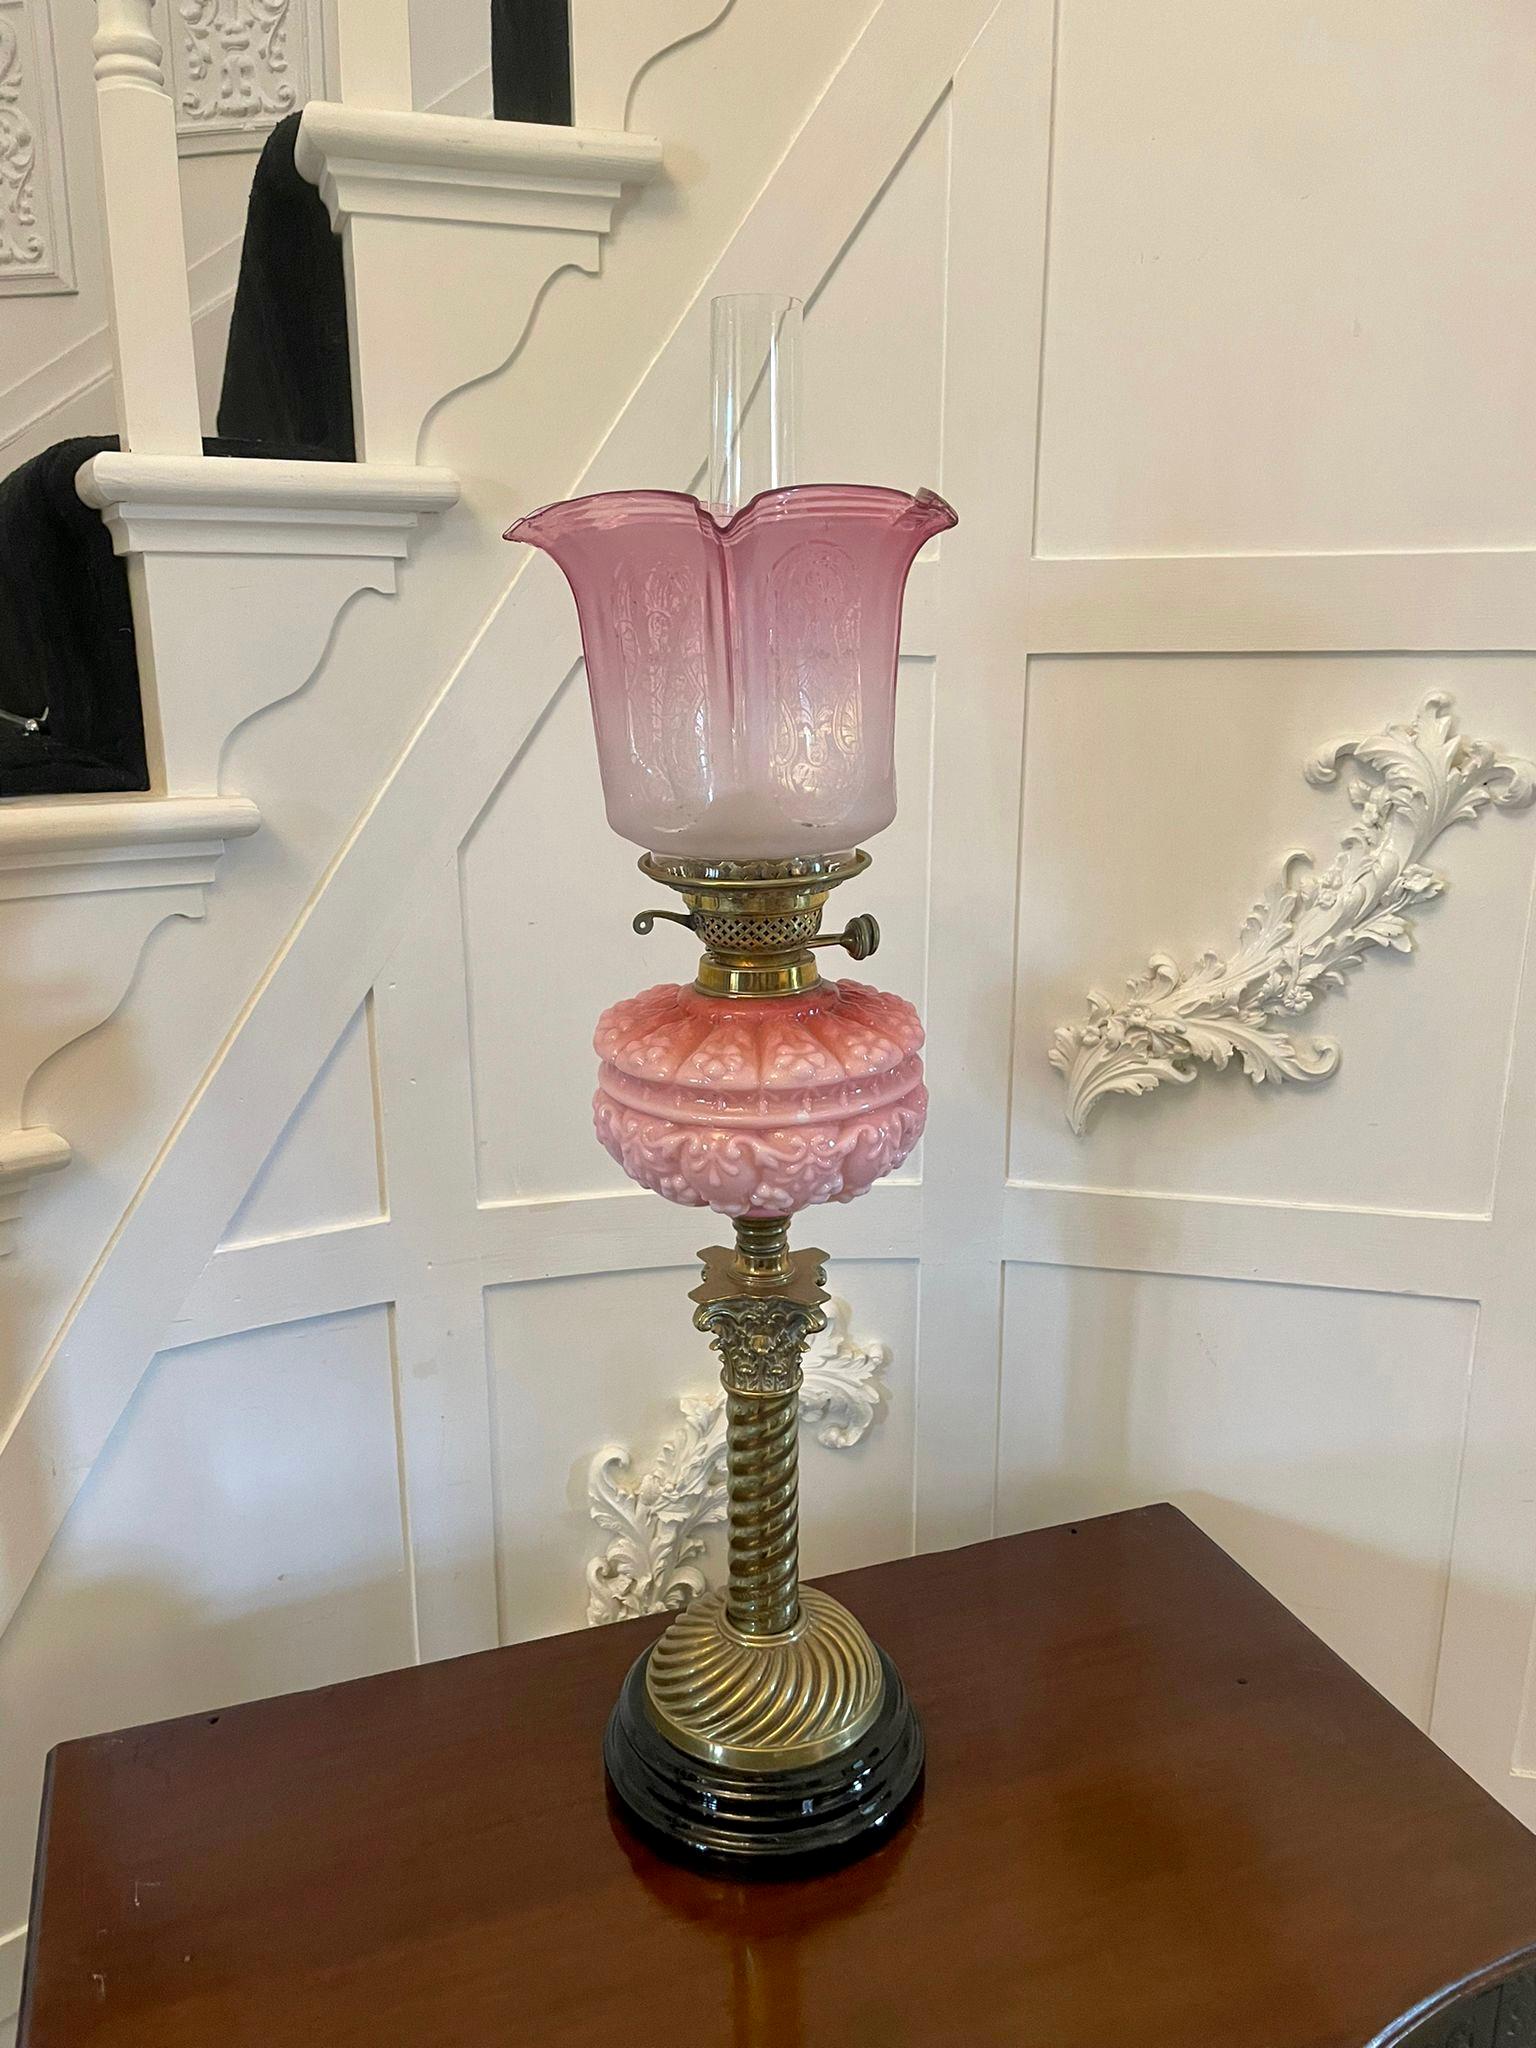 Outstanding quality antique Victorian brass and pink glass oil lamp having the original cranberry glass shade and chimney outstanding quality pink glass font with double burners supported by a rope twist column standing on a circular base


A